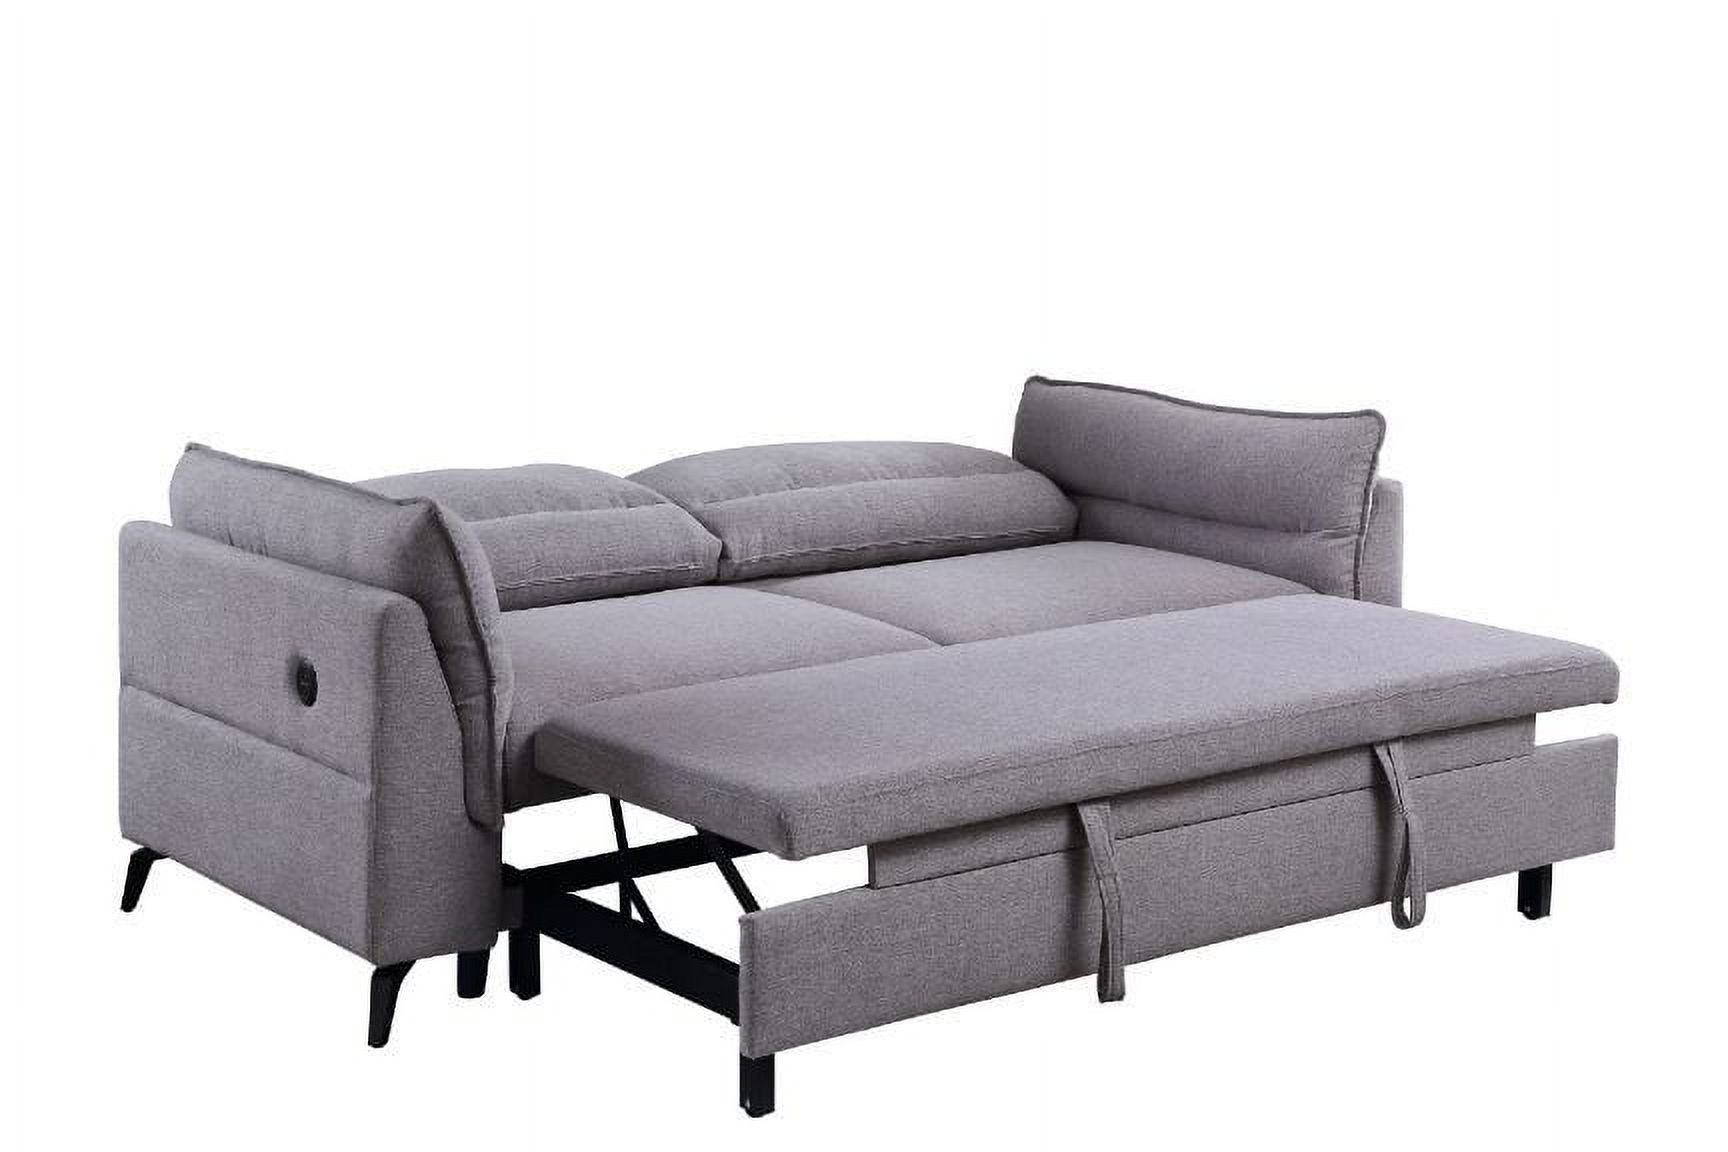 Gray Contemporary Living Room Furniture Pull-out Sleeper Sofa Built in USB Port - image 3 of 3